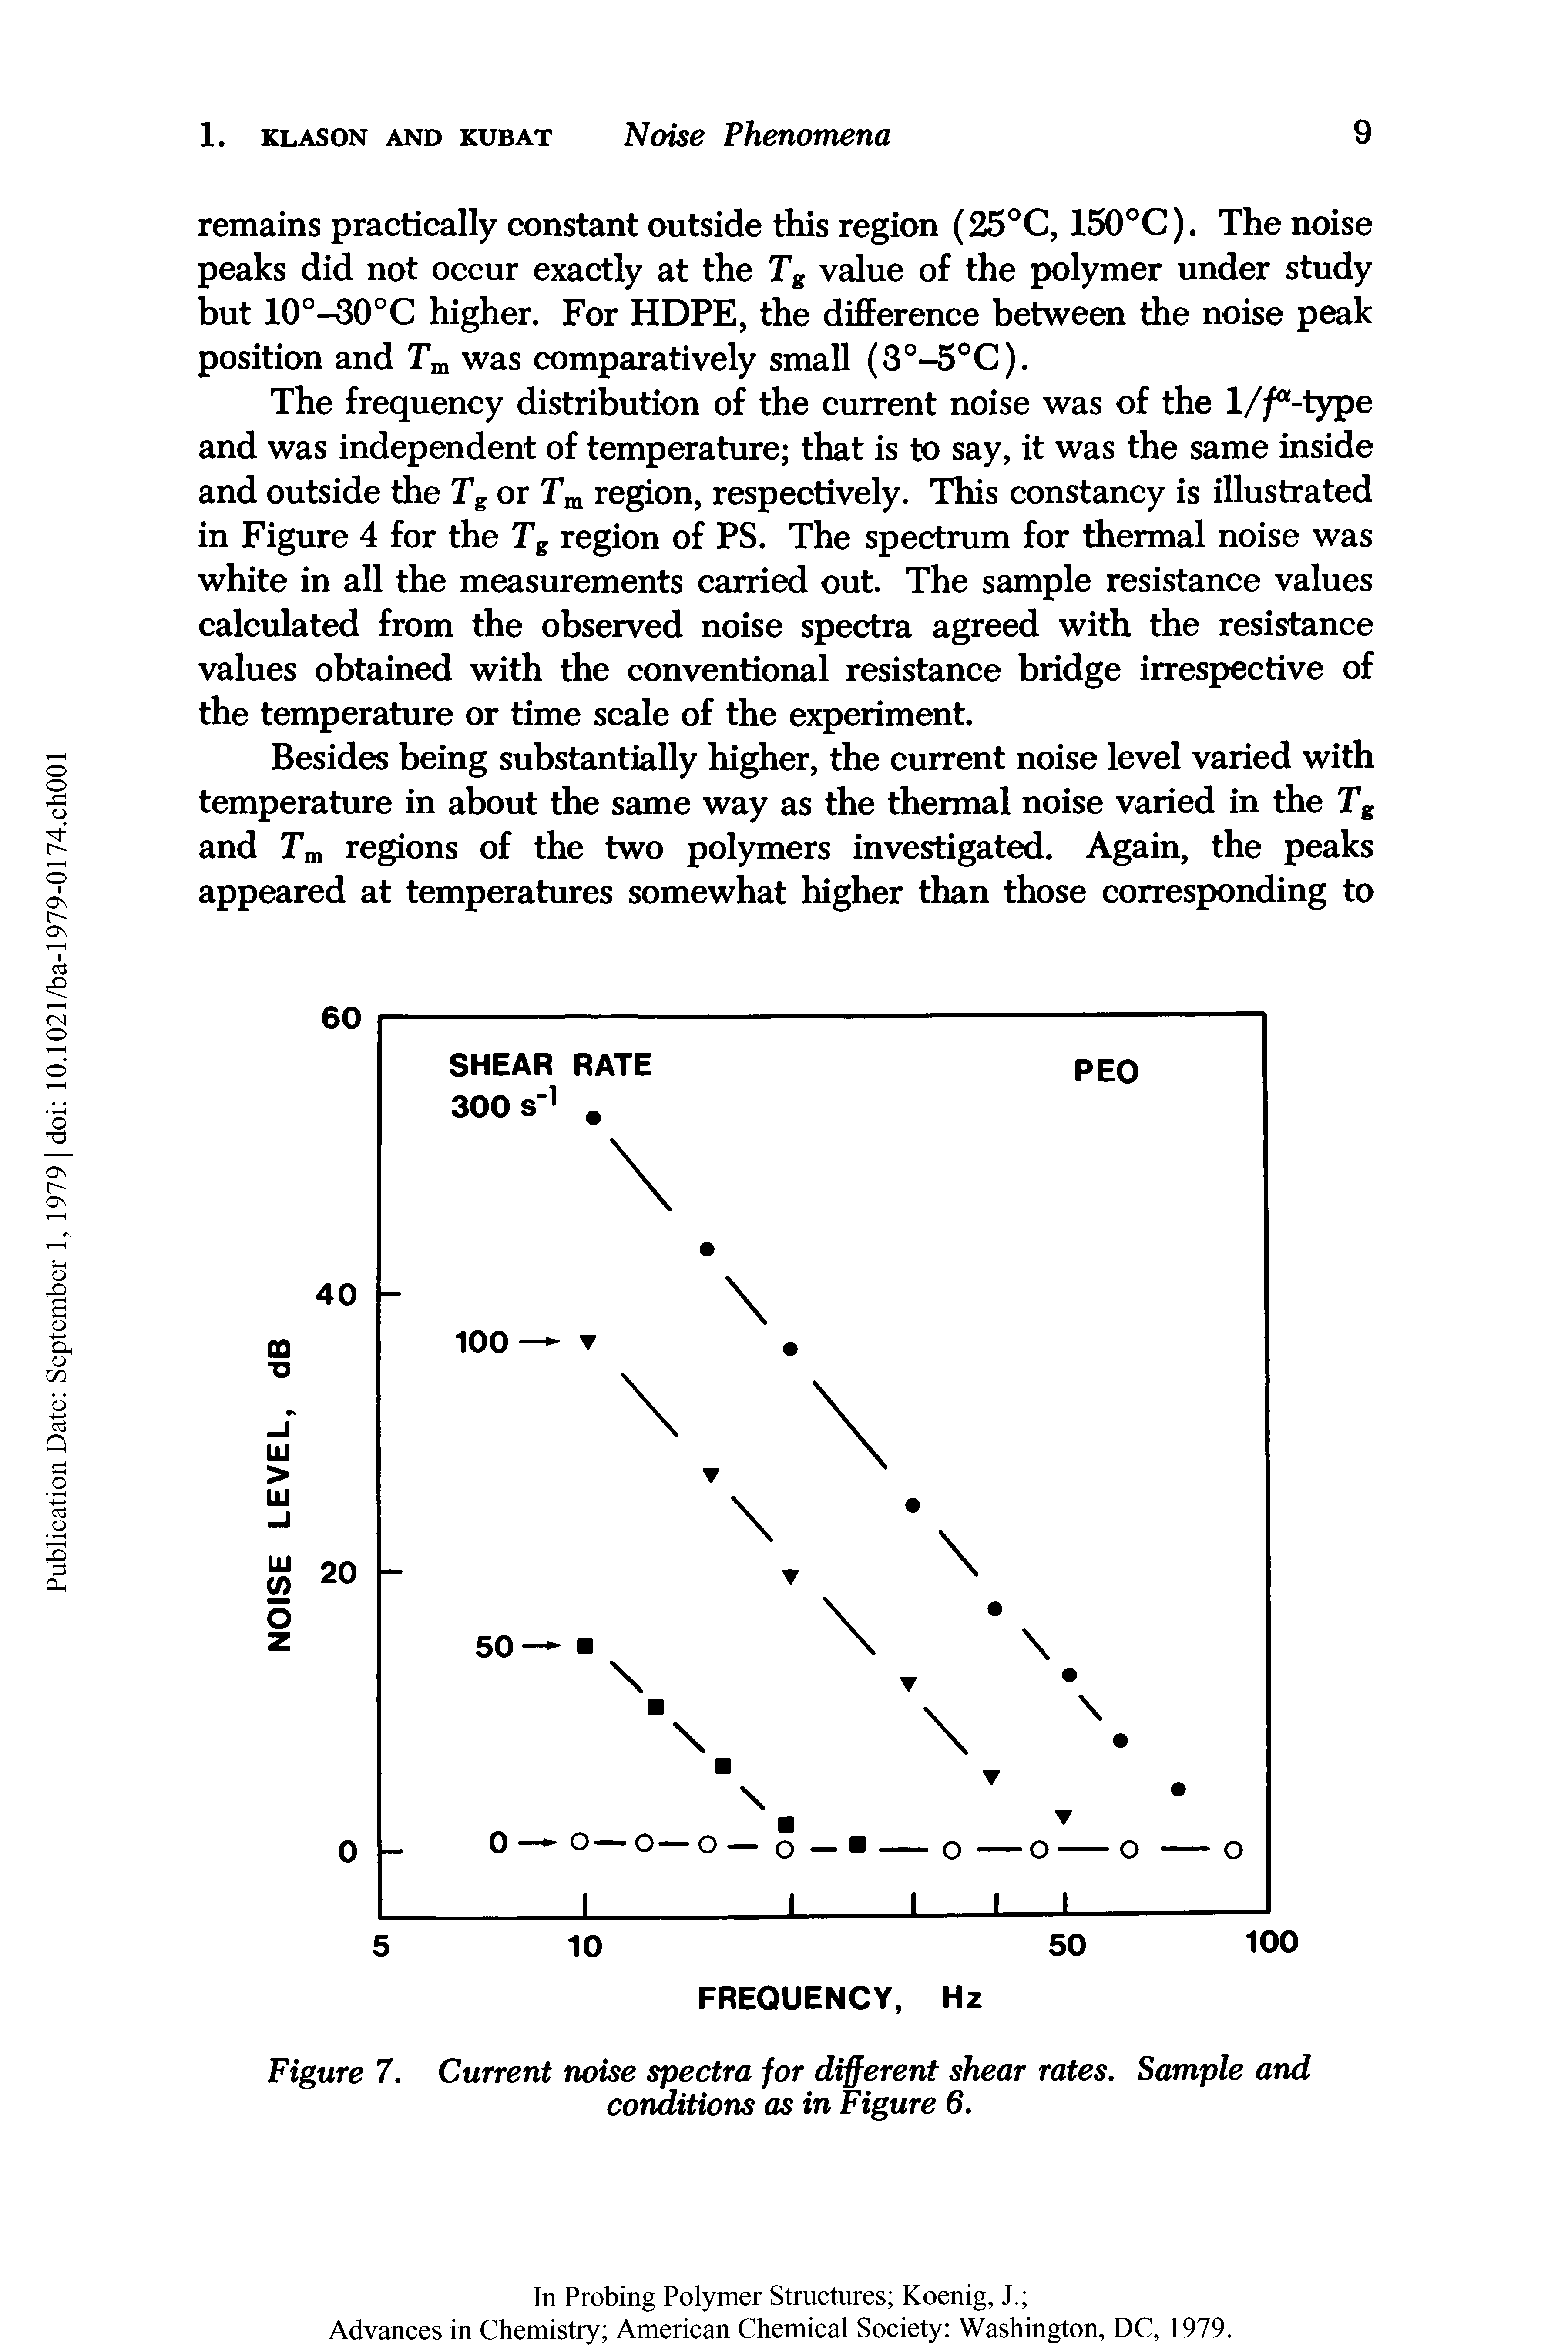 Figure 7. Current noise spectra for different shear rates. Sample and conditions as in Figure 6.